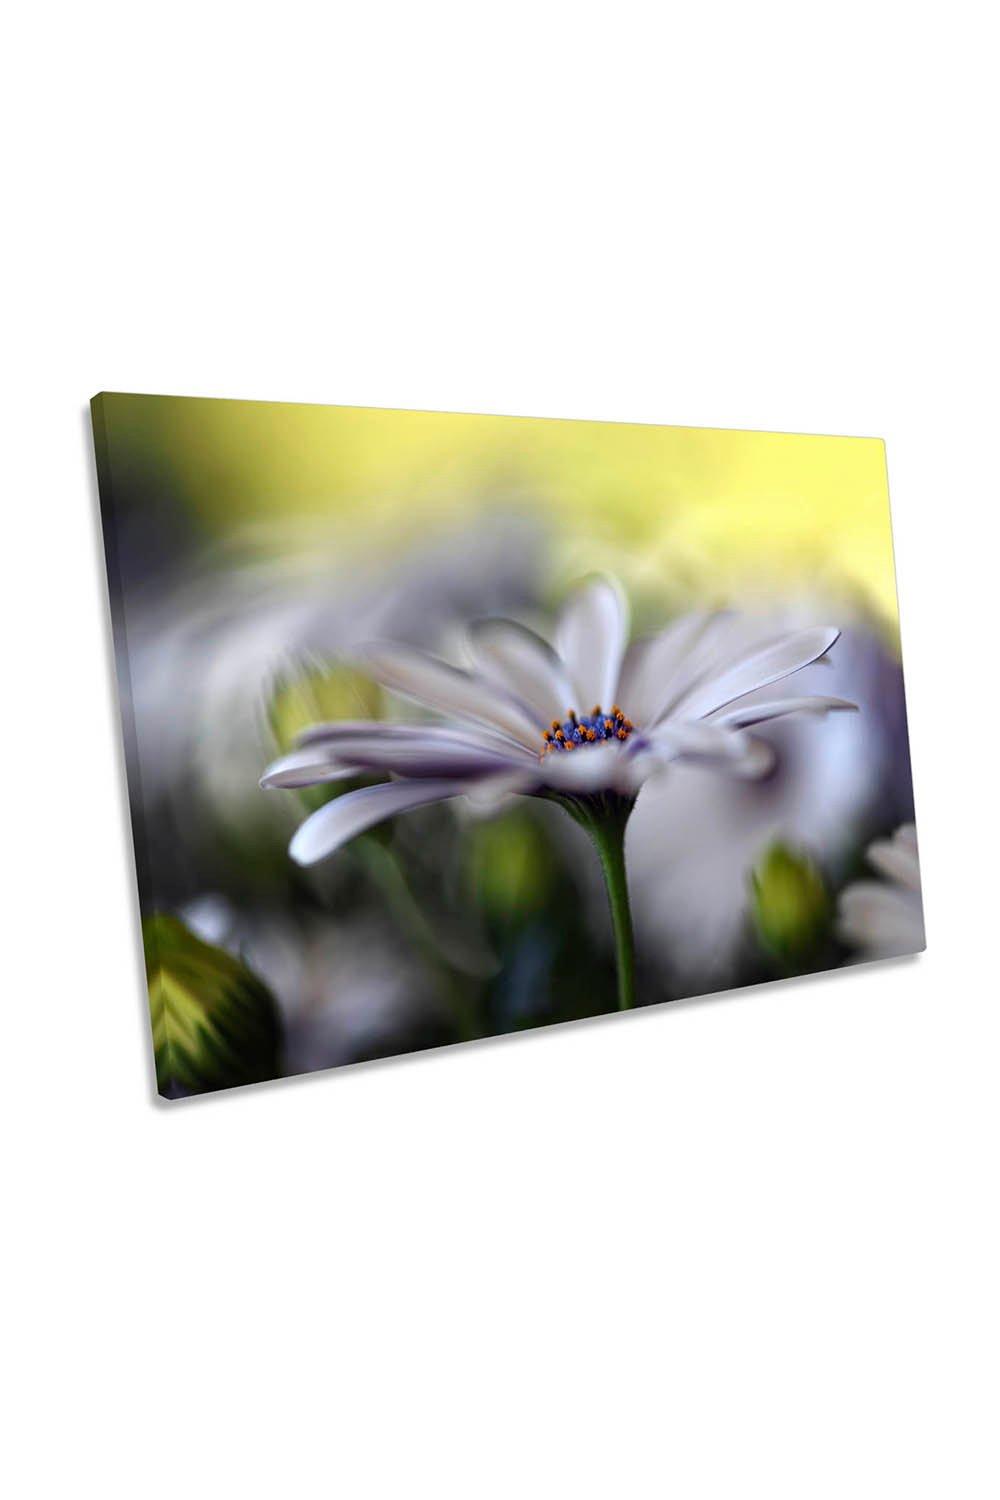 Dreamy Floral White Flower Canvas Wall Art Picture Print